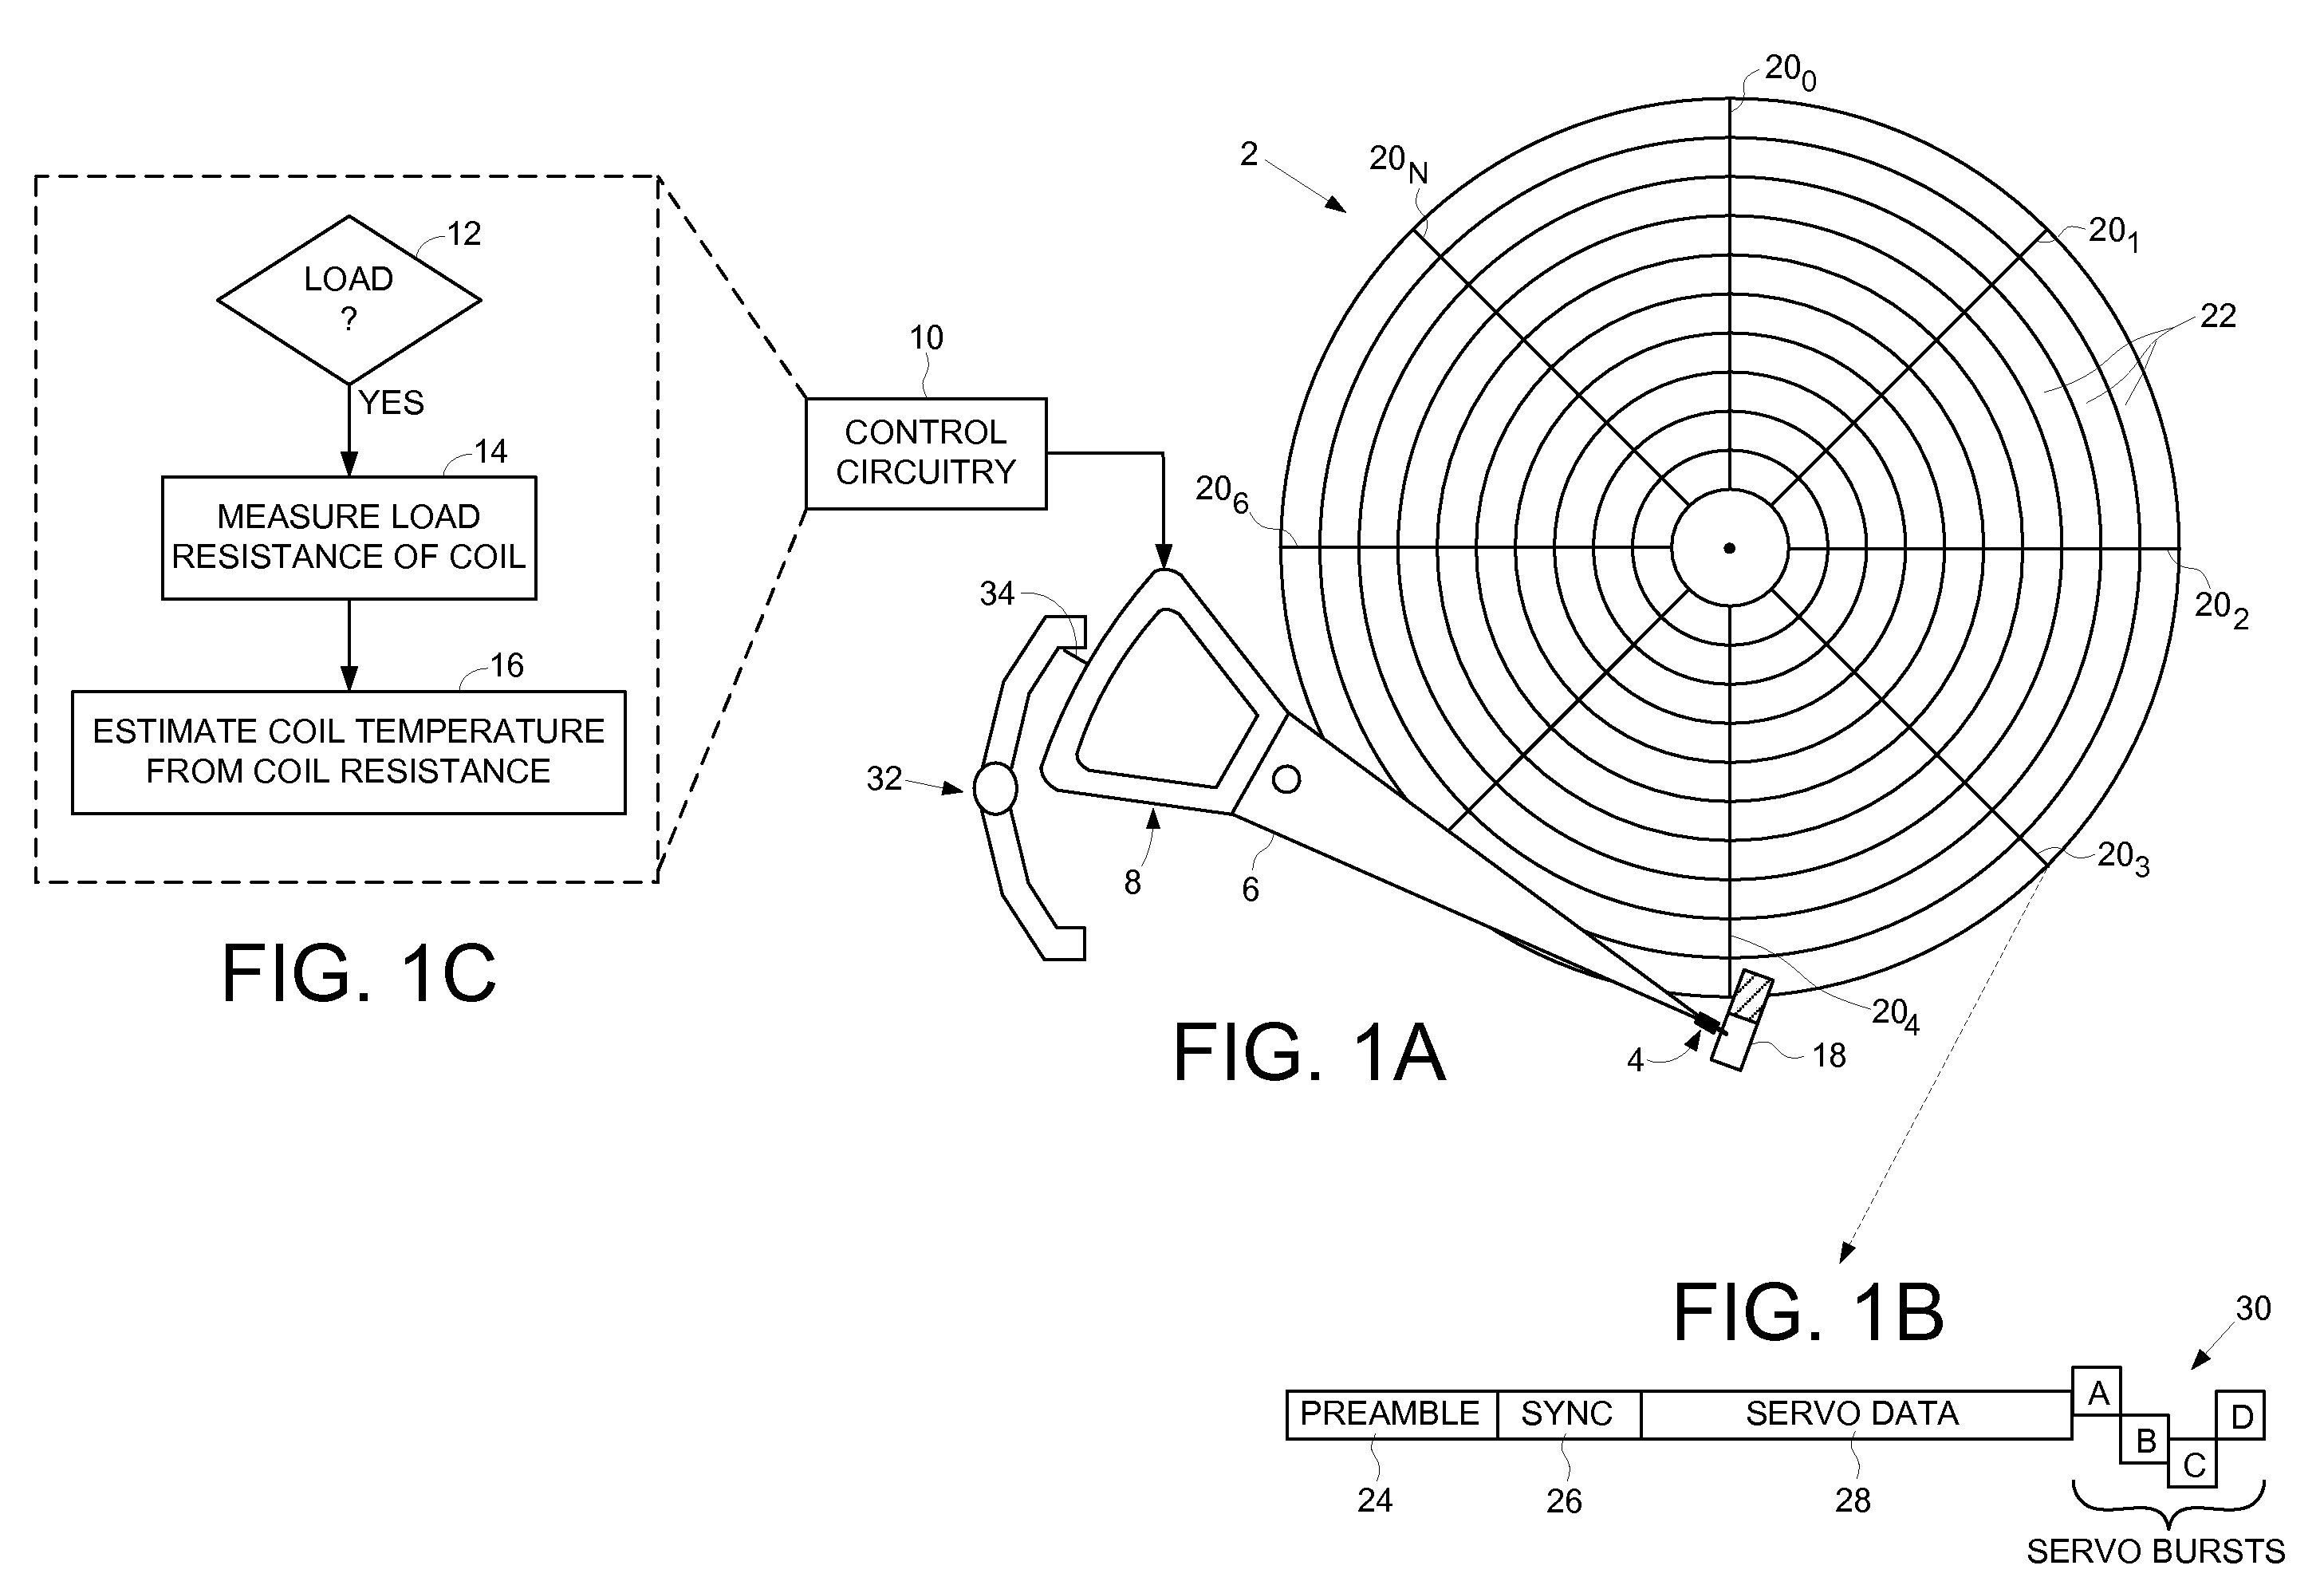 Disk drive initializing a coil temperature estimation algorithm using a resistance of the coil estimated during a load operation